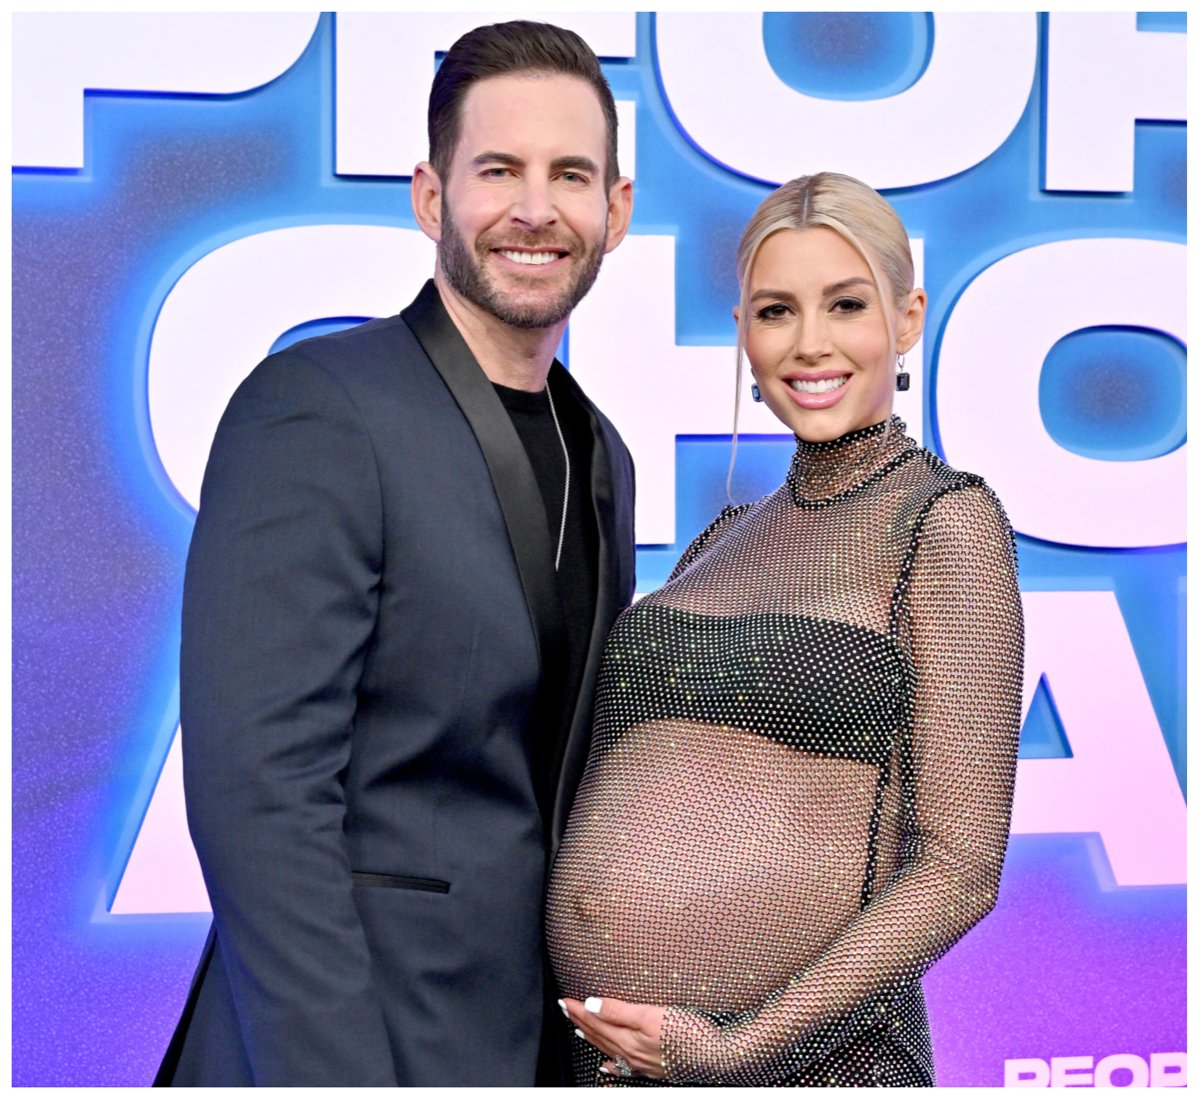 Tarek El Moussa and his pregnant wife, Heather Rae Young, smile and pose together at an event.